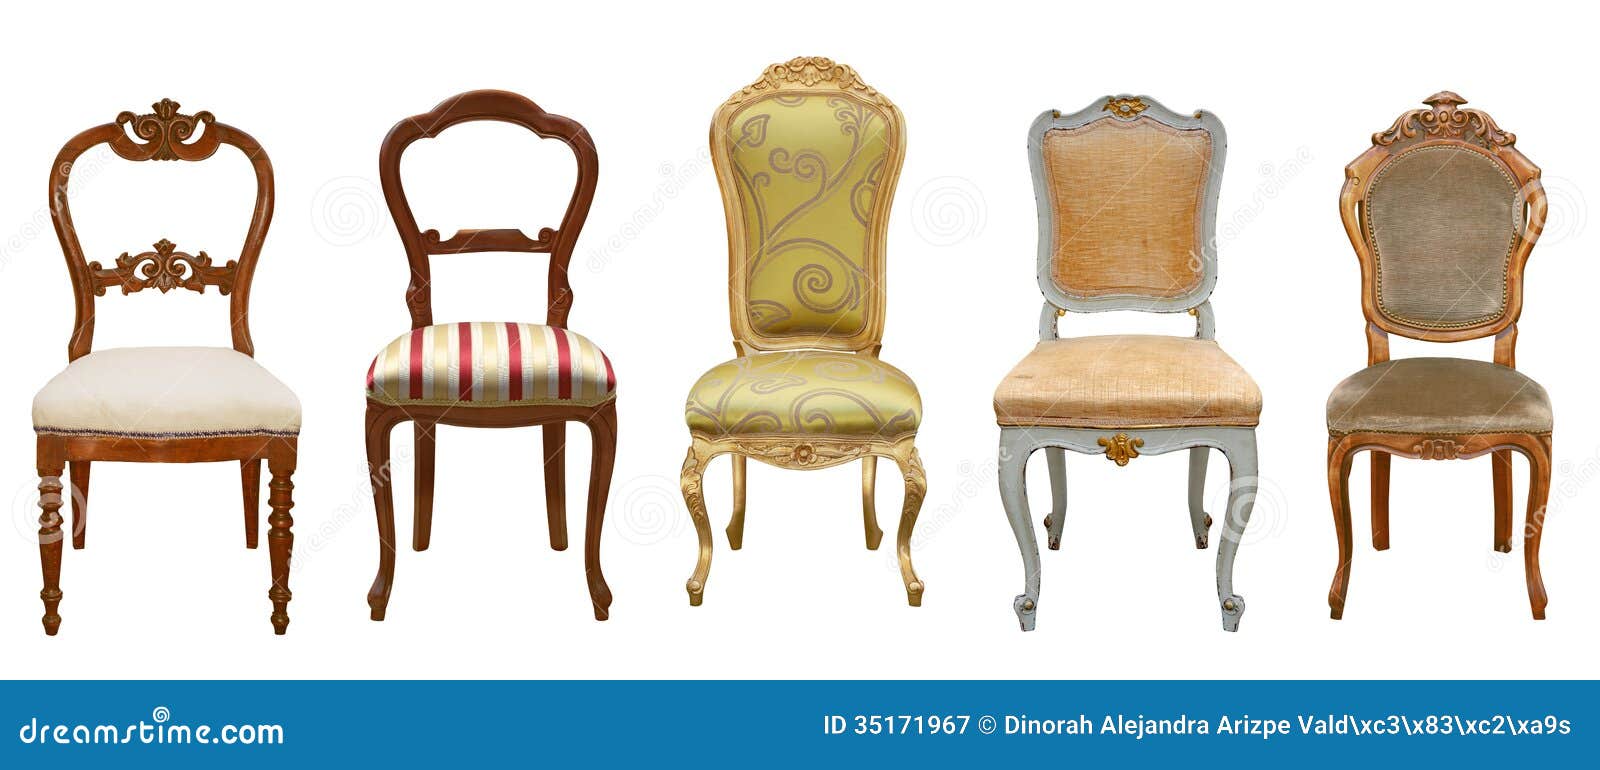 Vintage Chairs Isolated Royalty Free Stock Photography - Image ...